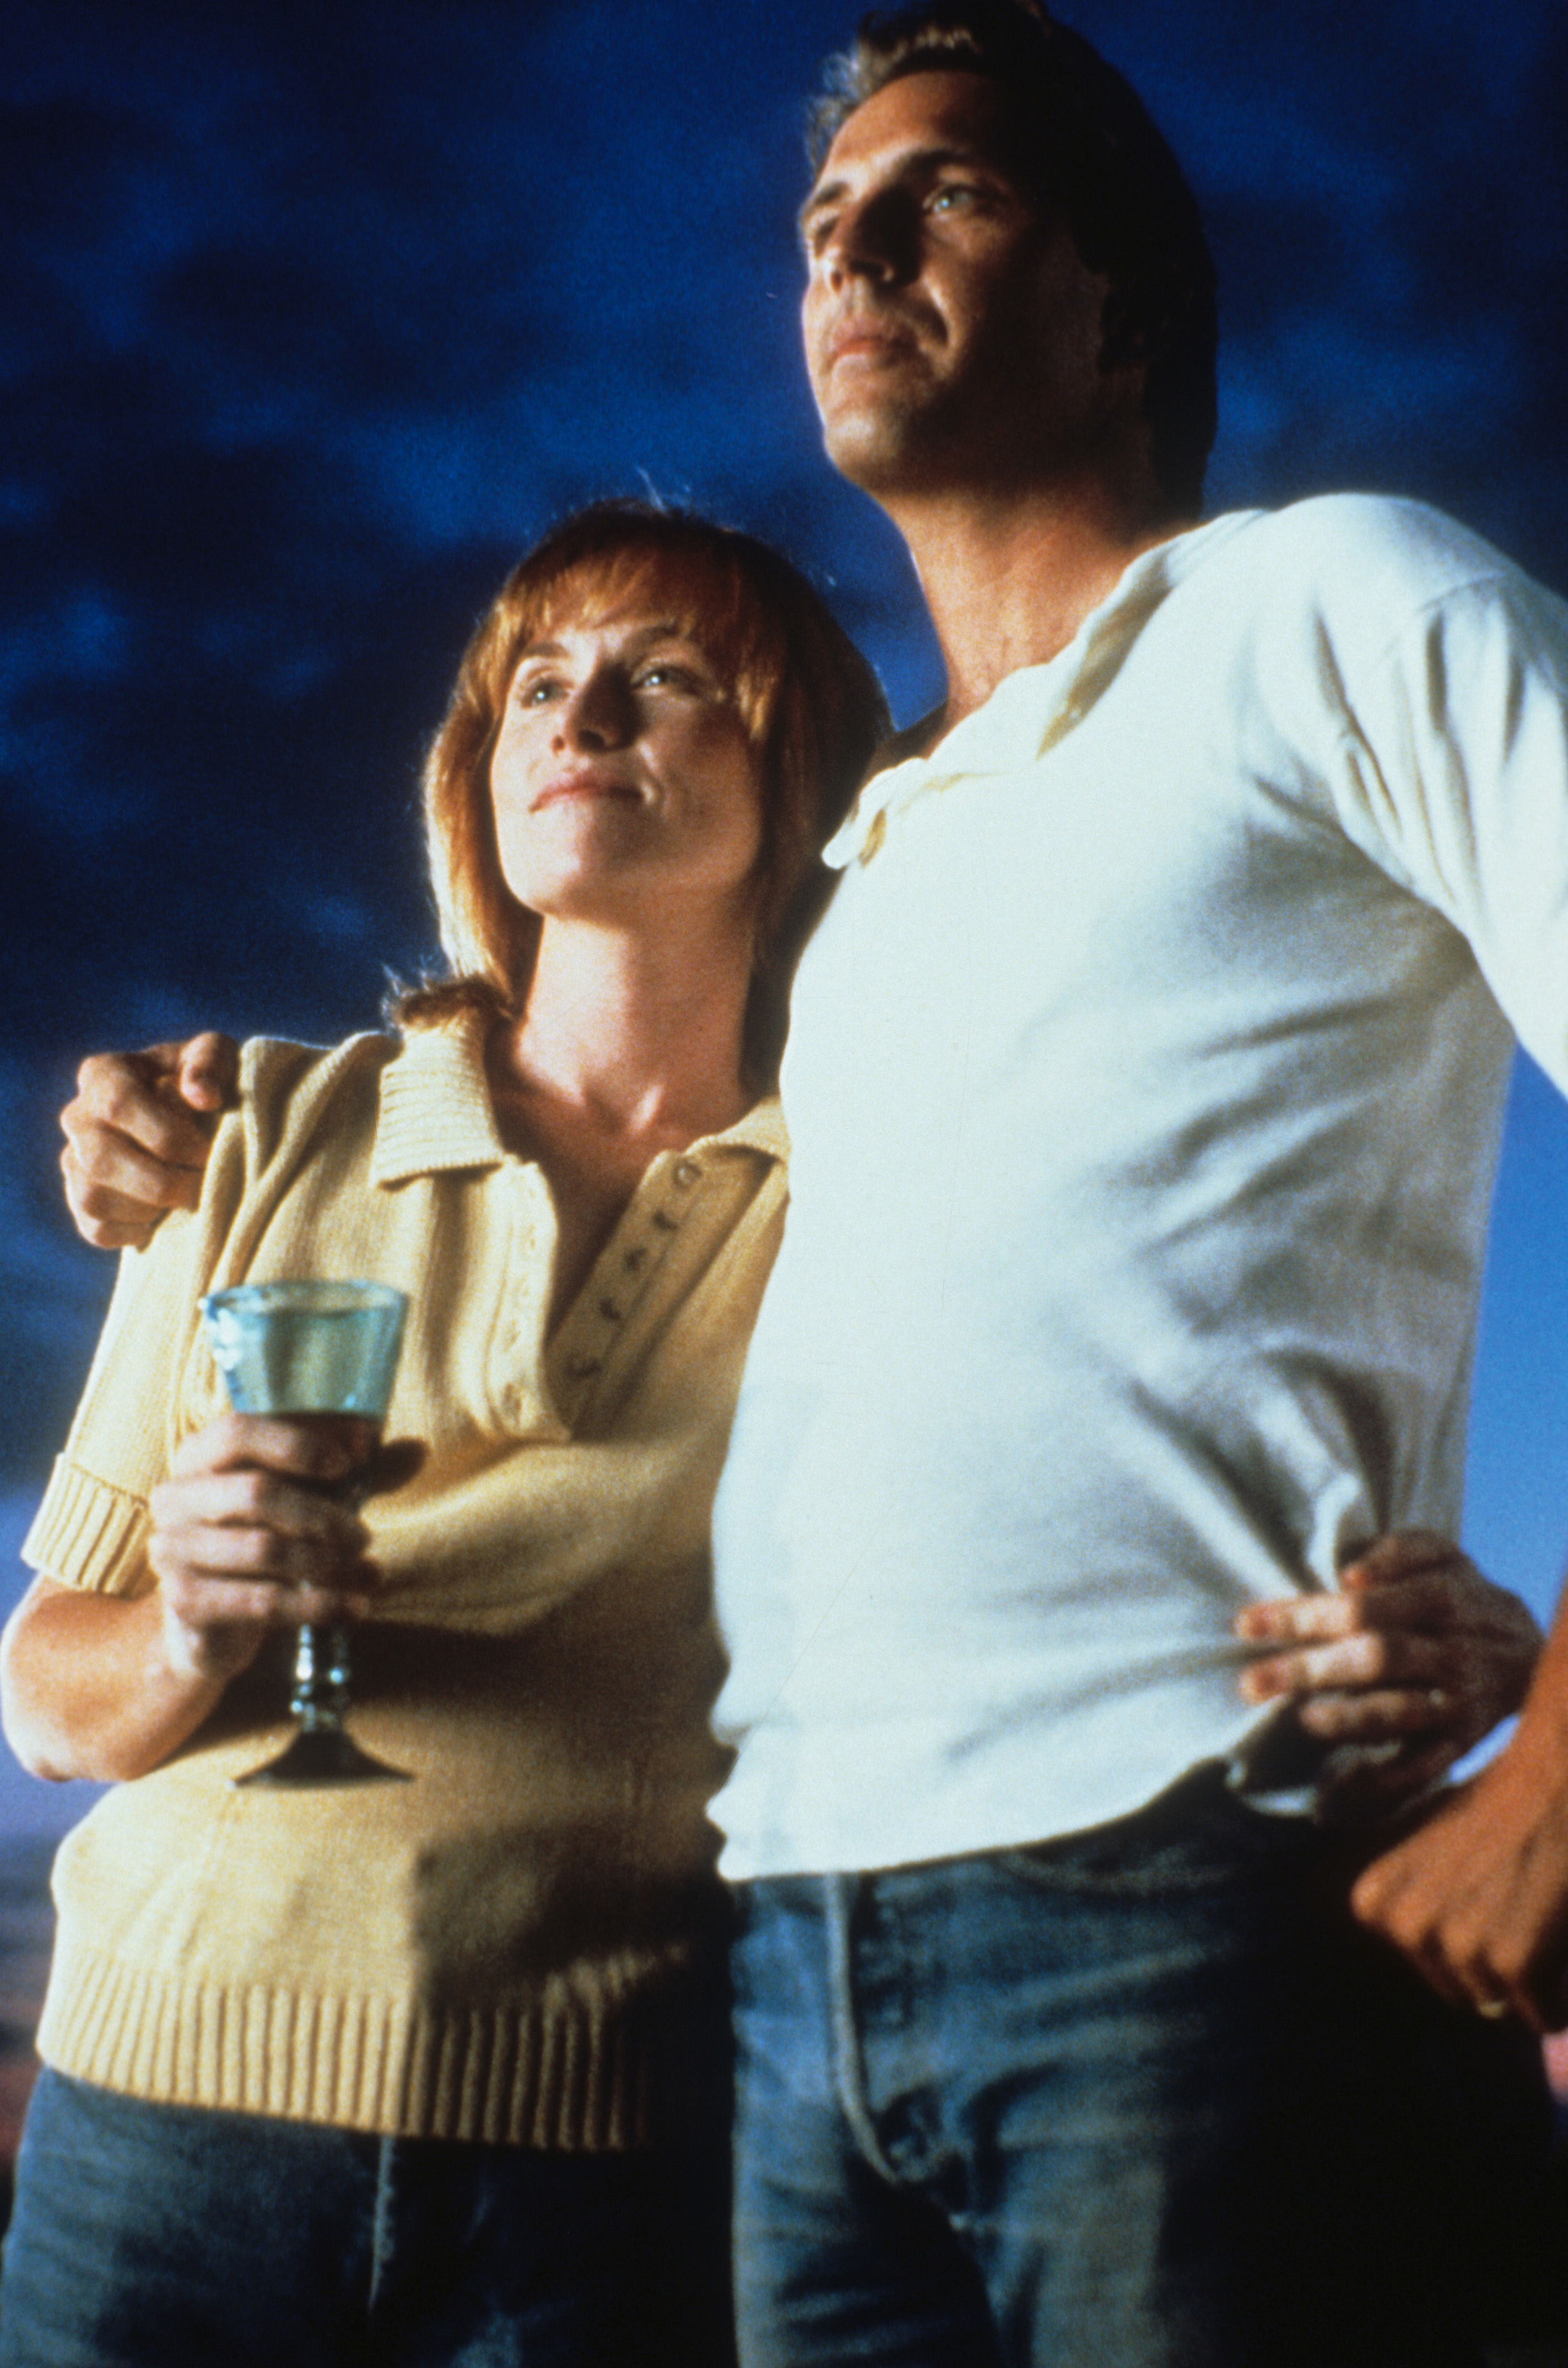 Field of Dreams: Kevin Costner puts his arm around Amy Madigan